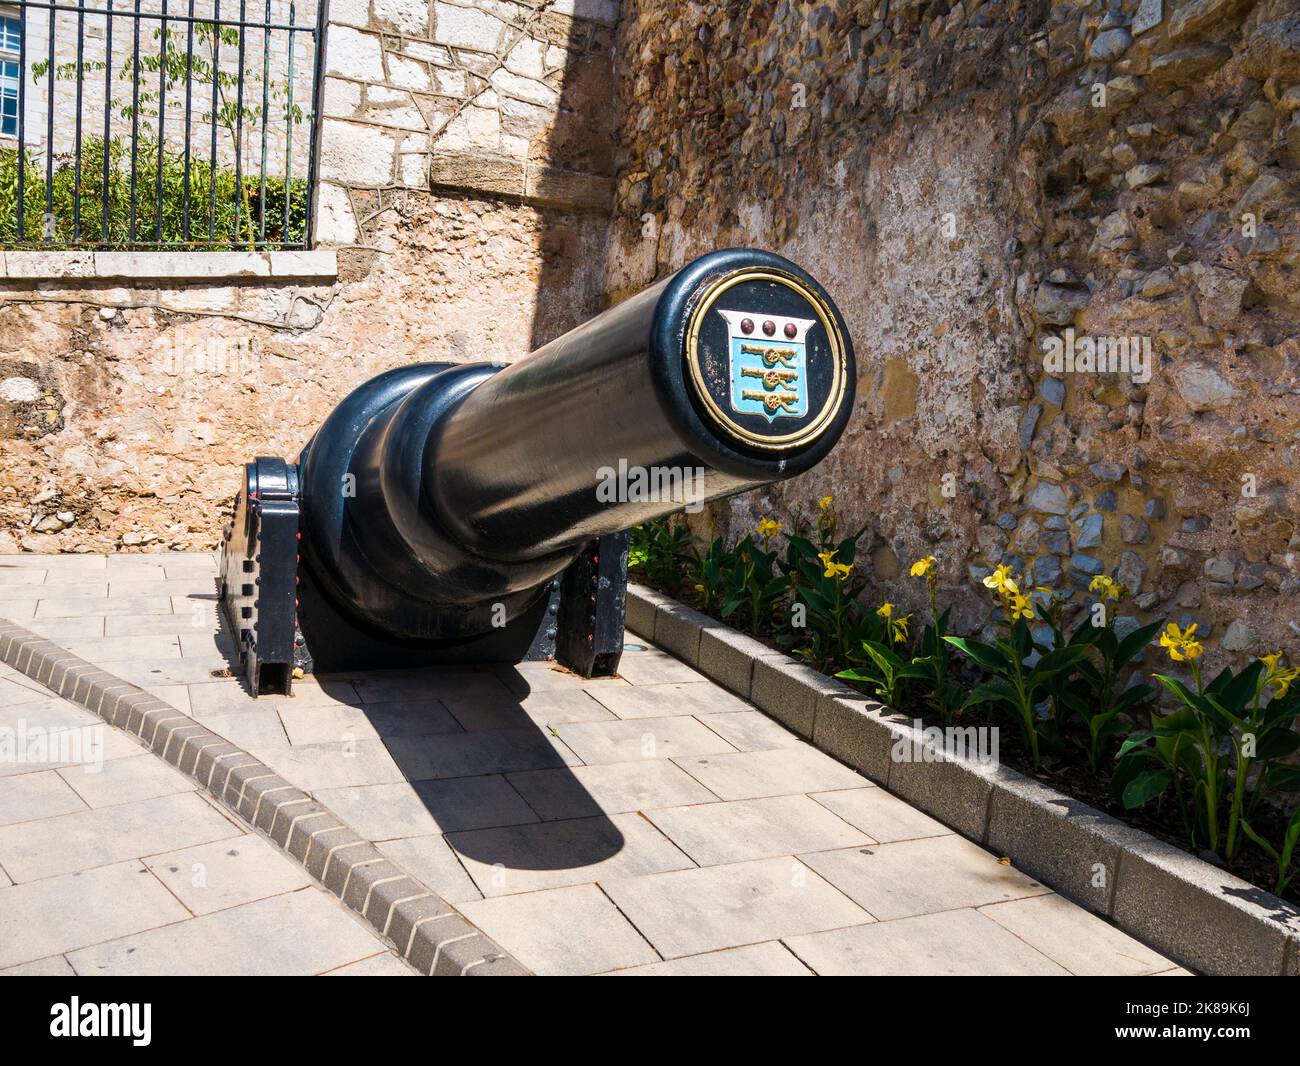 Artillery piece displaying a tampion with the Coat of Arms of the Royal Army Ordnance Corps is the 10-inch 18 ton gun at South Port Gate Gibraltar Stock Photo